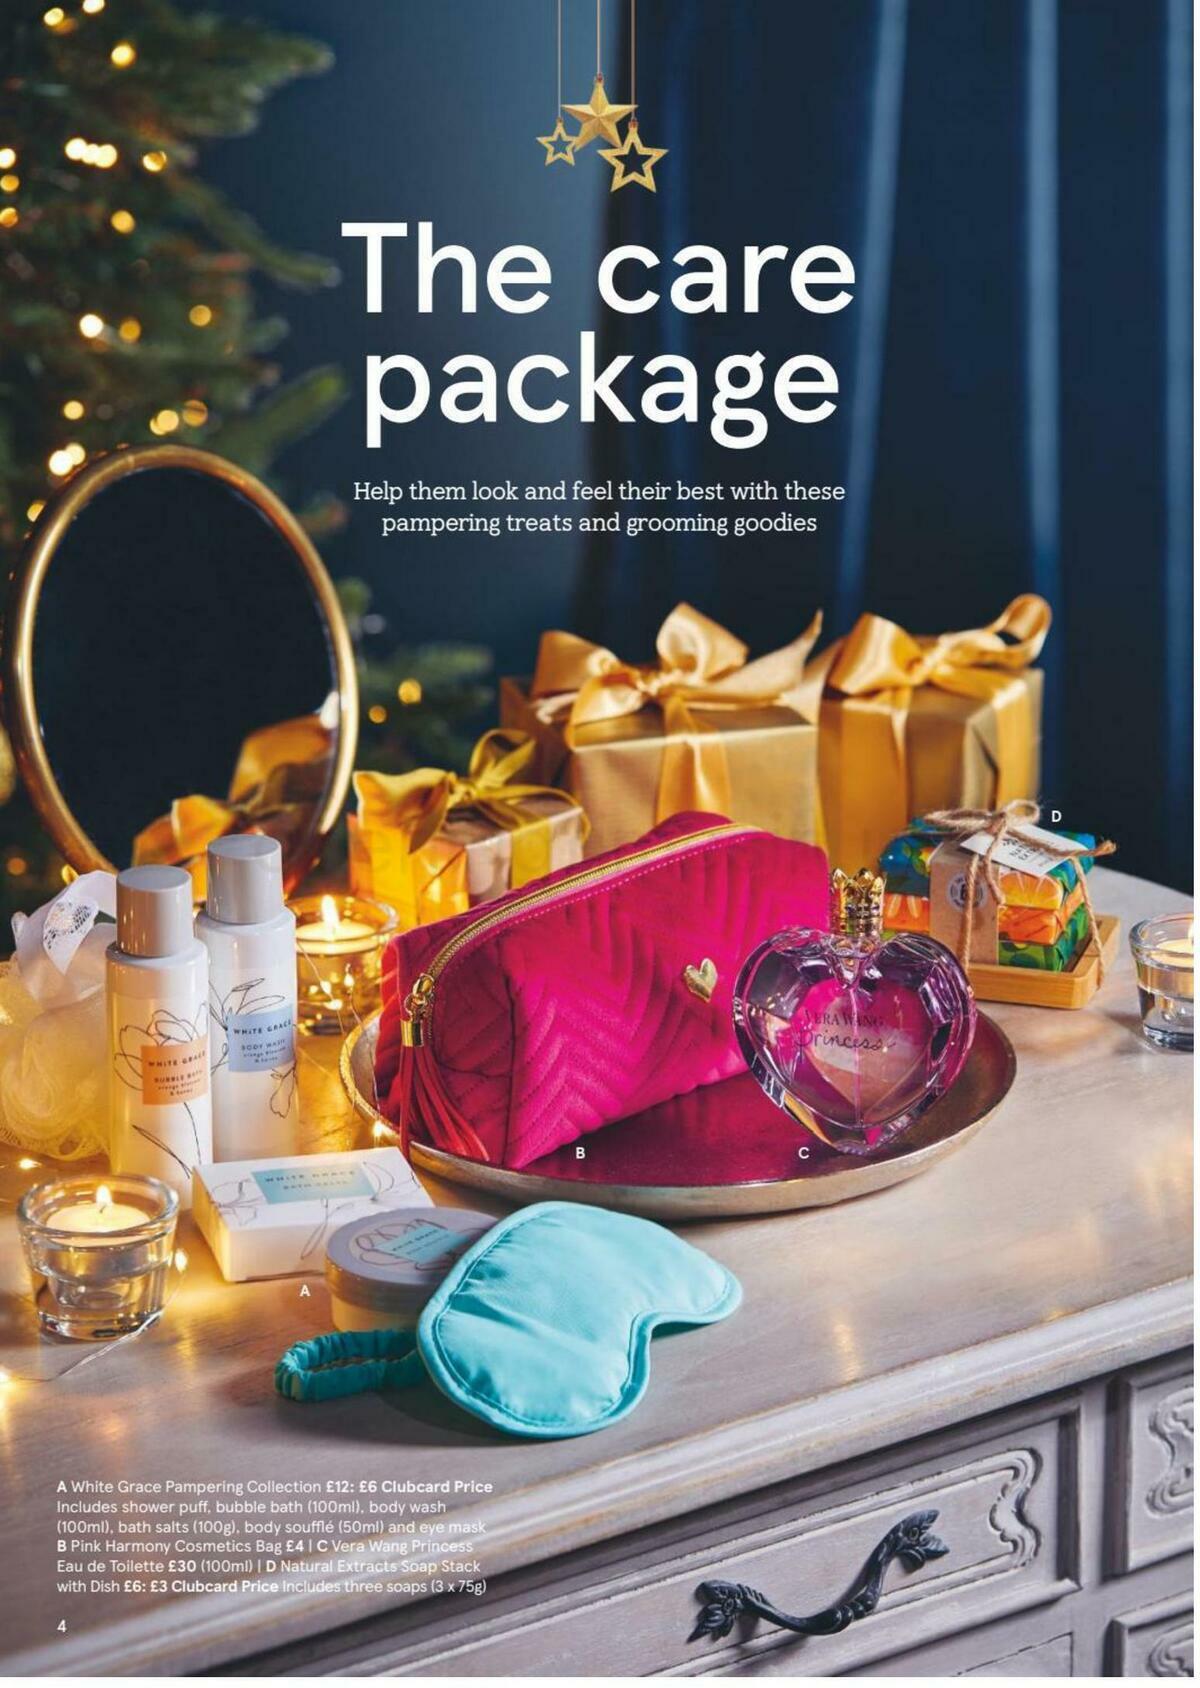 TESCO Christmas Gift Guide Offers from 30 October